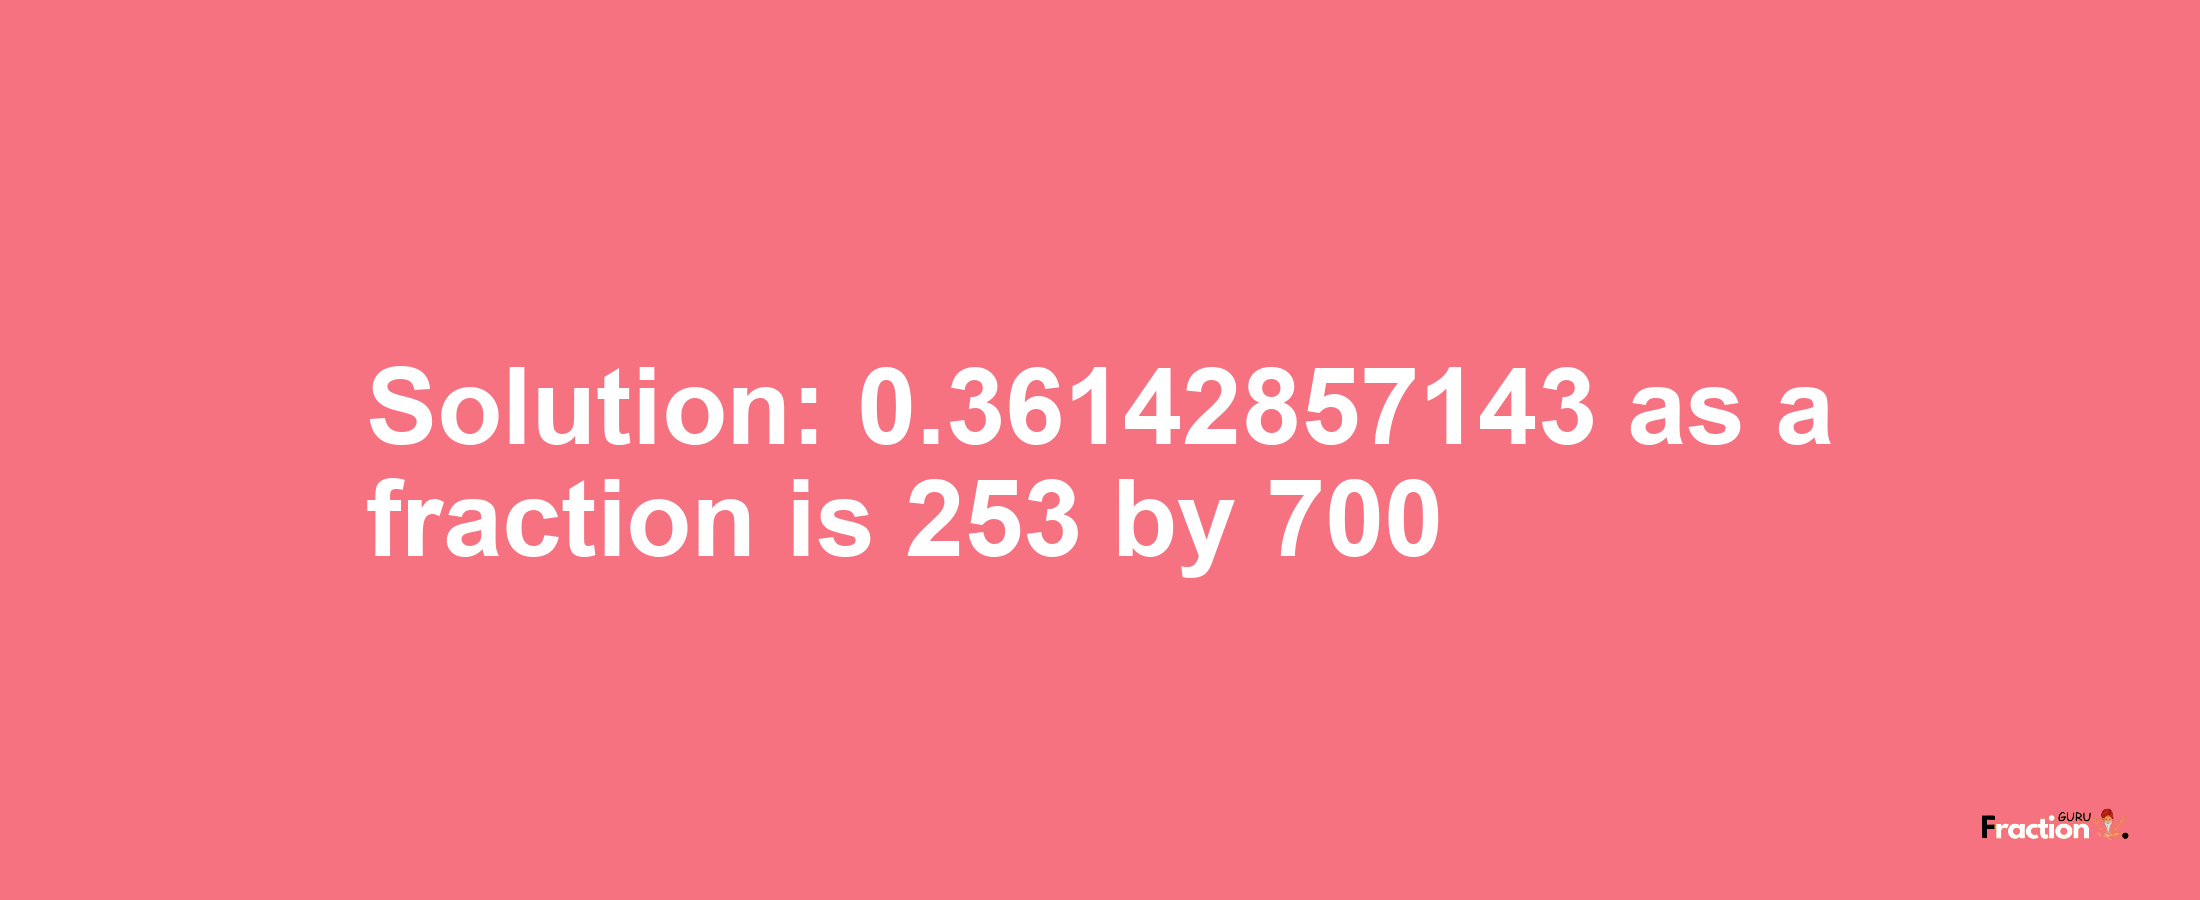 Solution:0.36142857143 as a fraction is 253/700